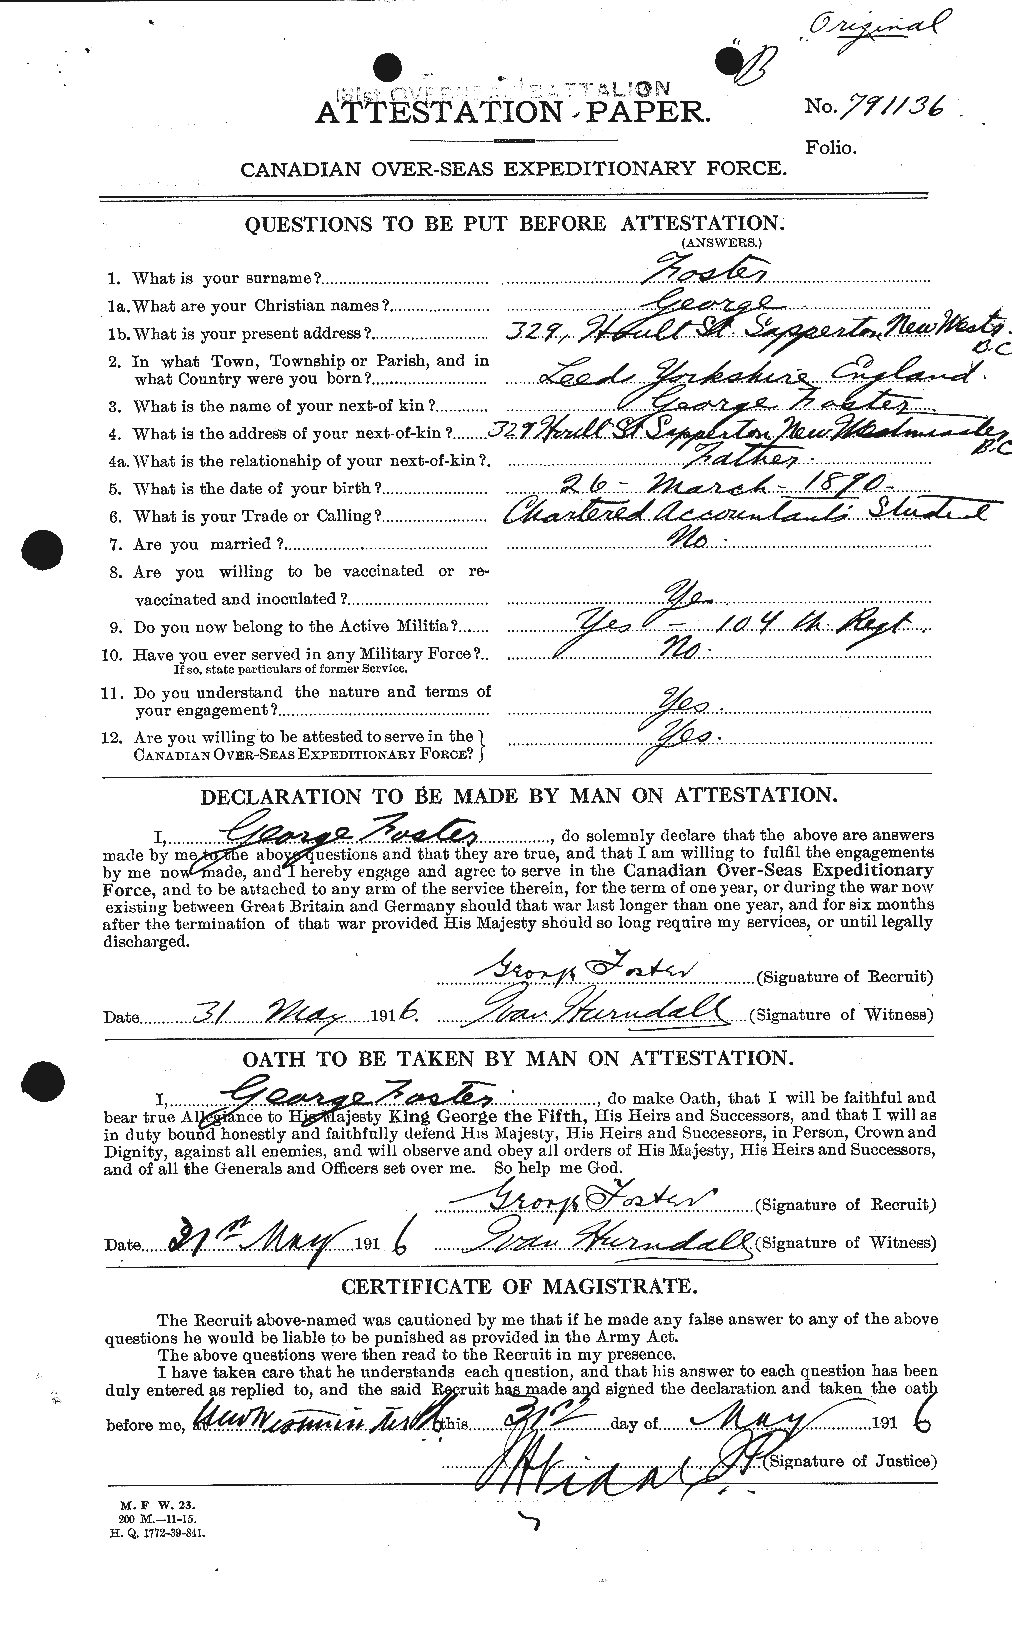 Personnel Records of the First World War - CEF 330666a